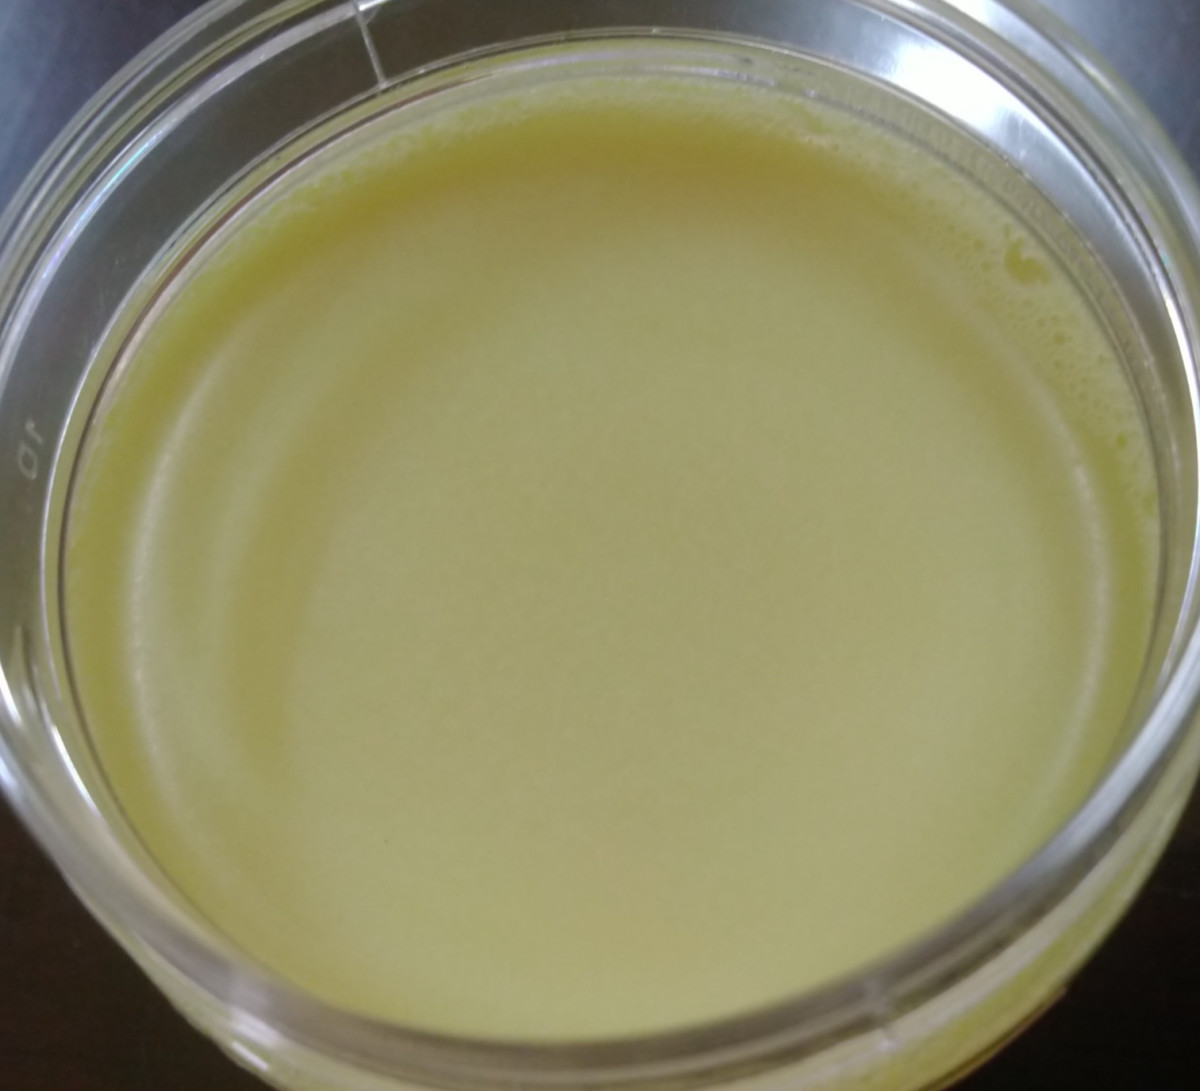 Bee wax cream for curing crack on the heels